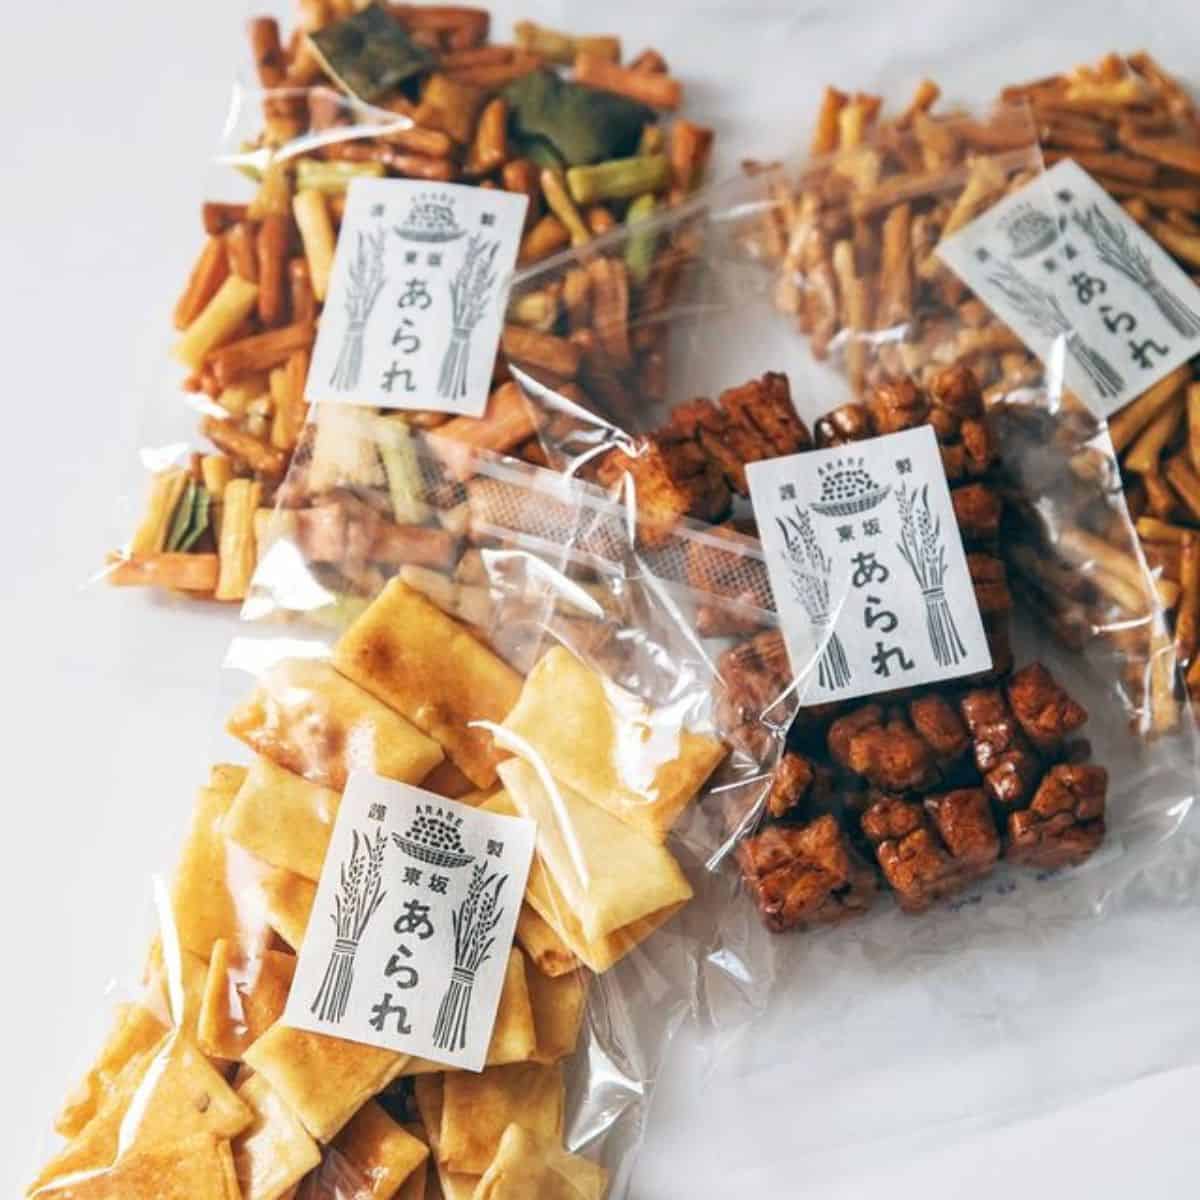 different types and shapes of Japanese rice crackers